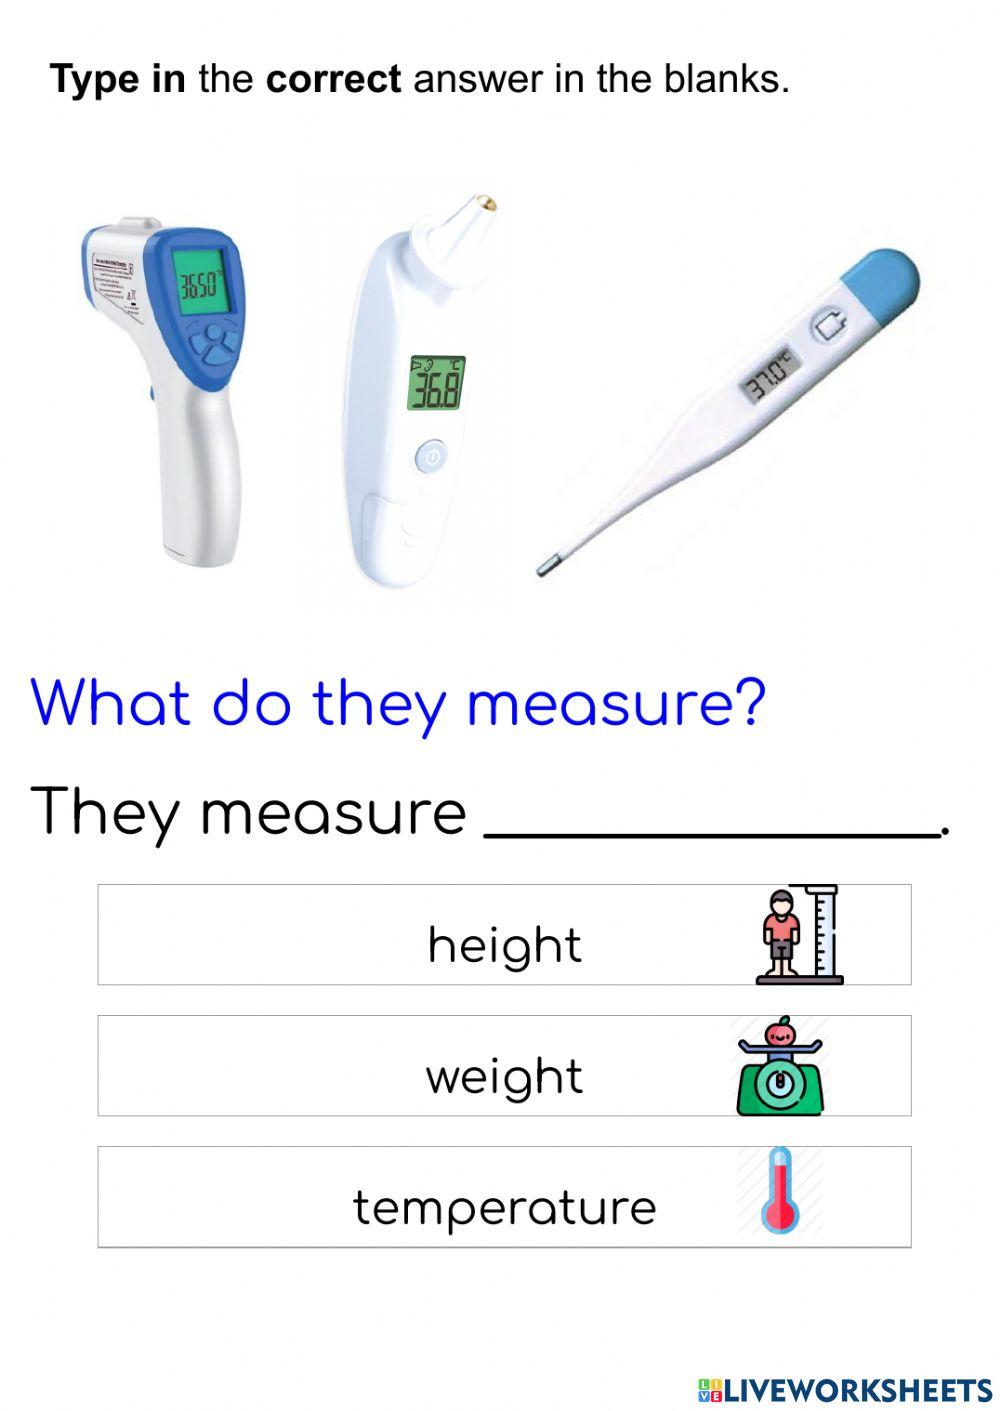 Thermometer and Weighing Scale recap